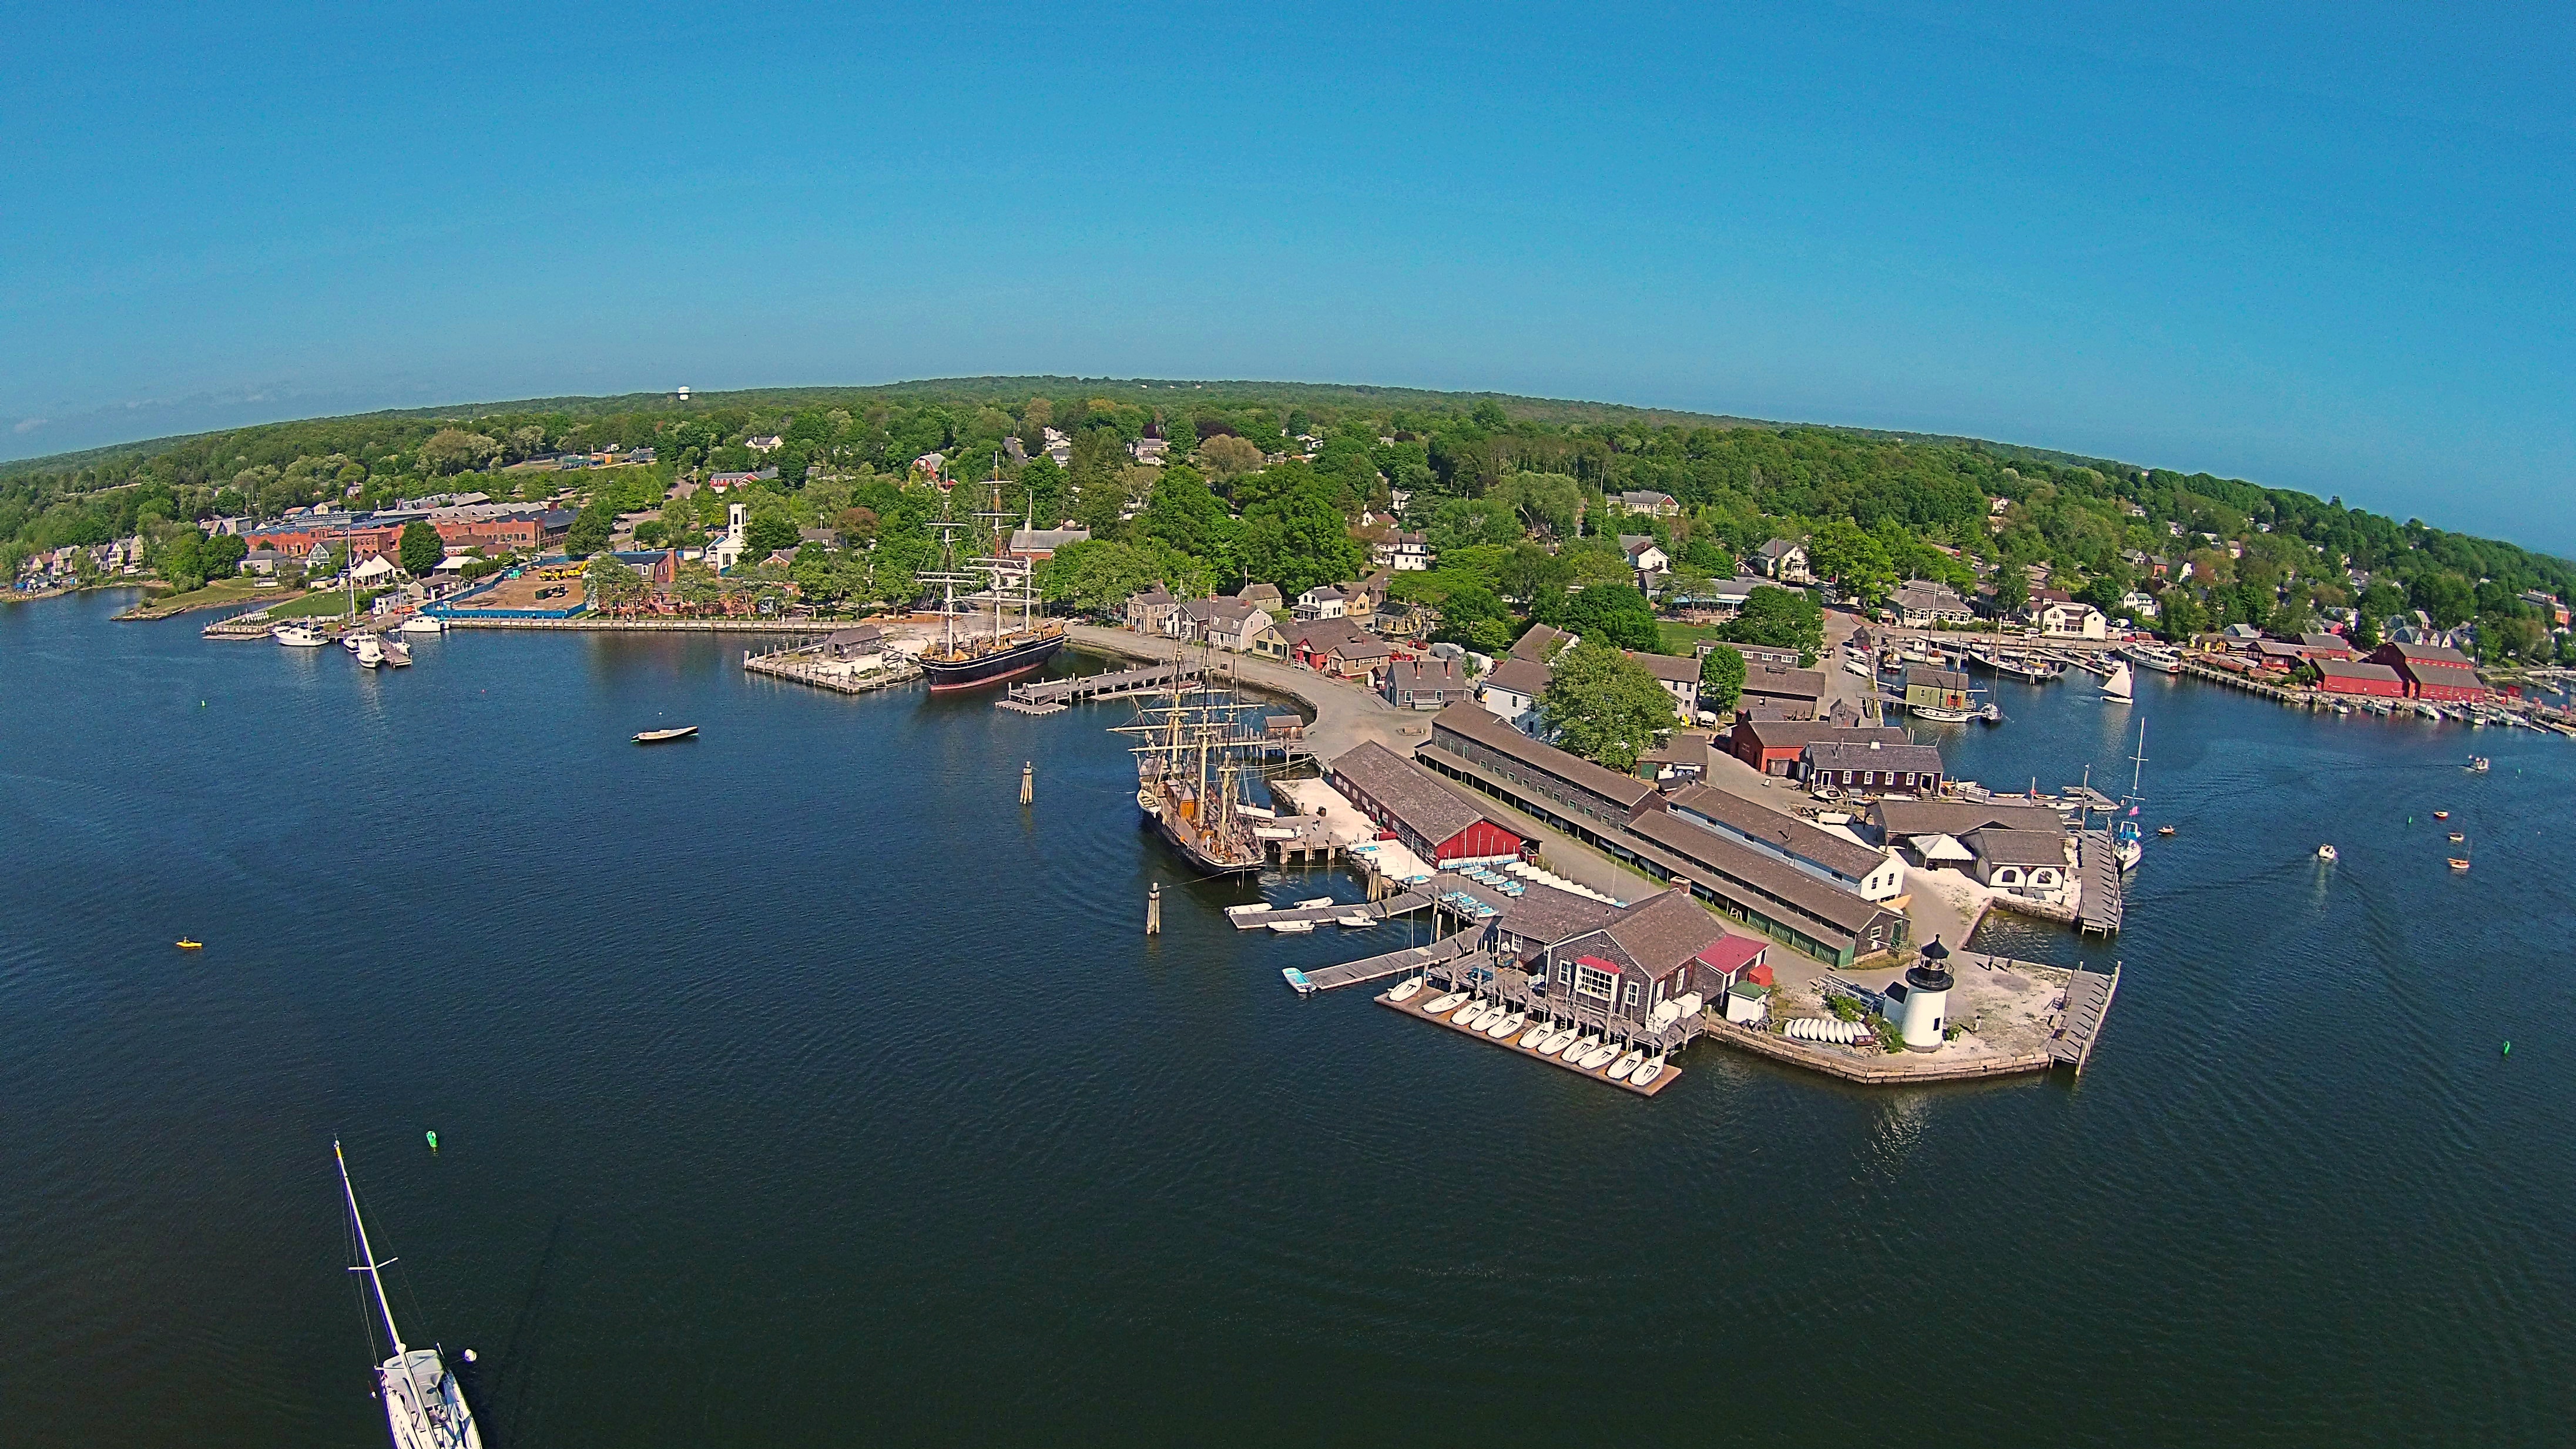 Mystic Seaport | Above The Fray Aerials